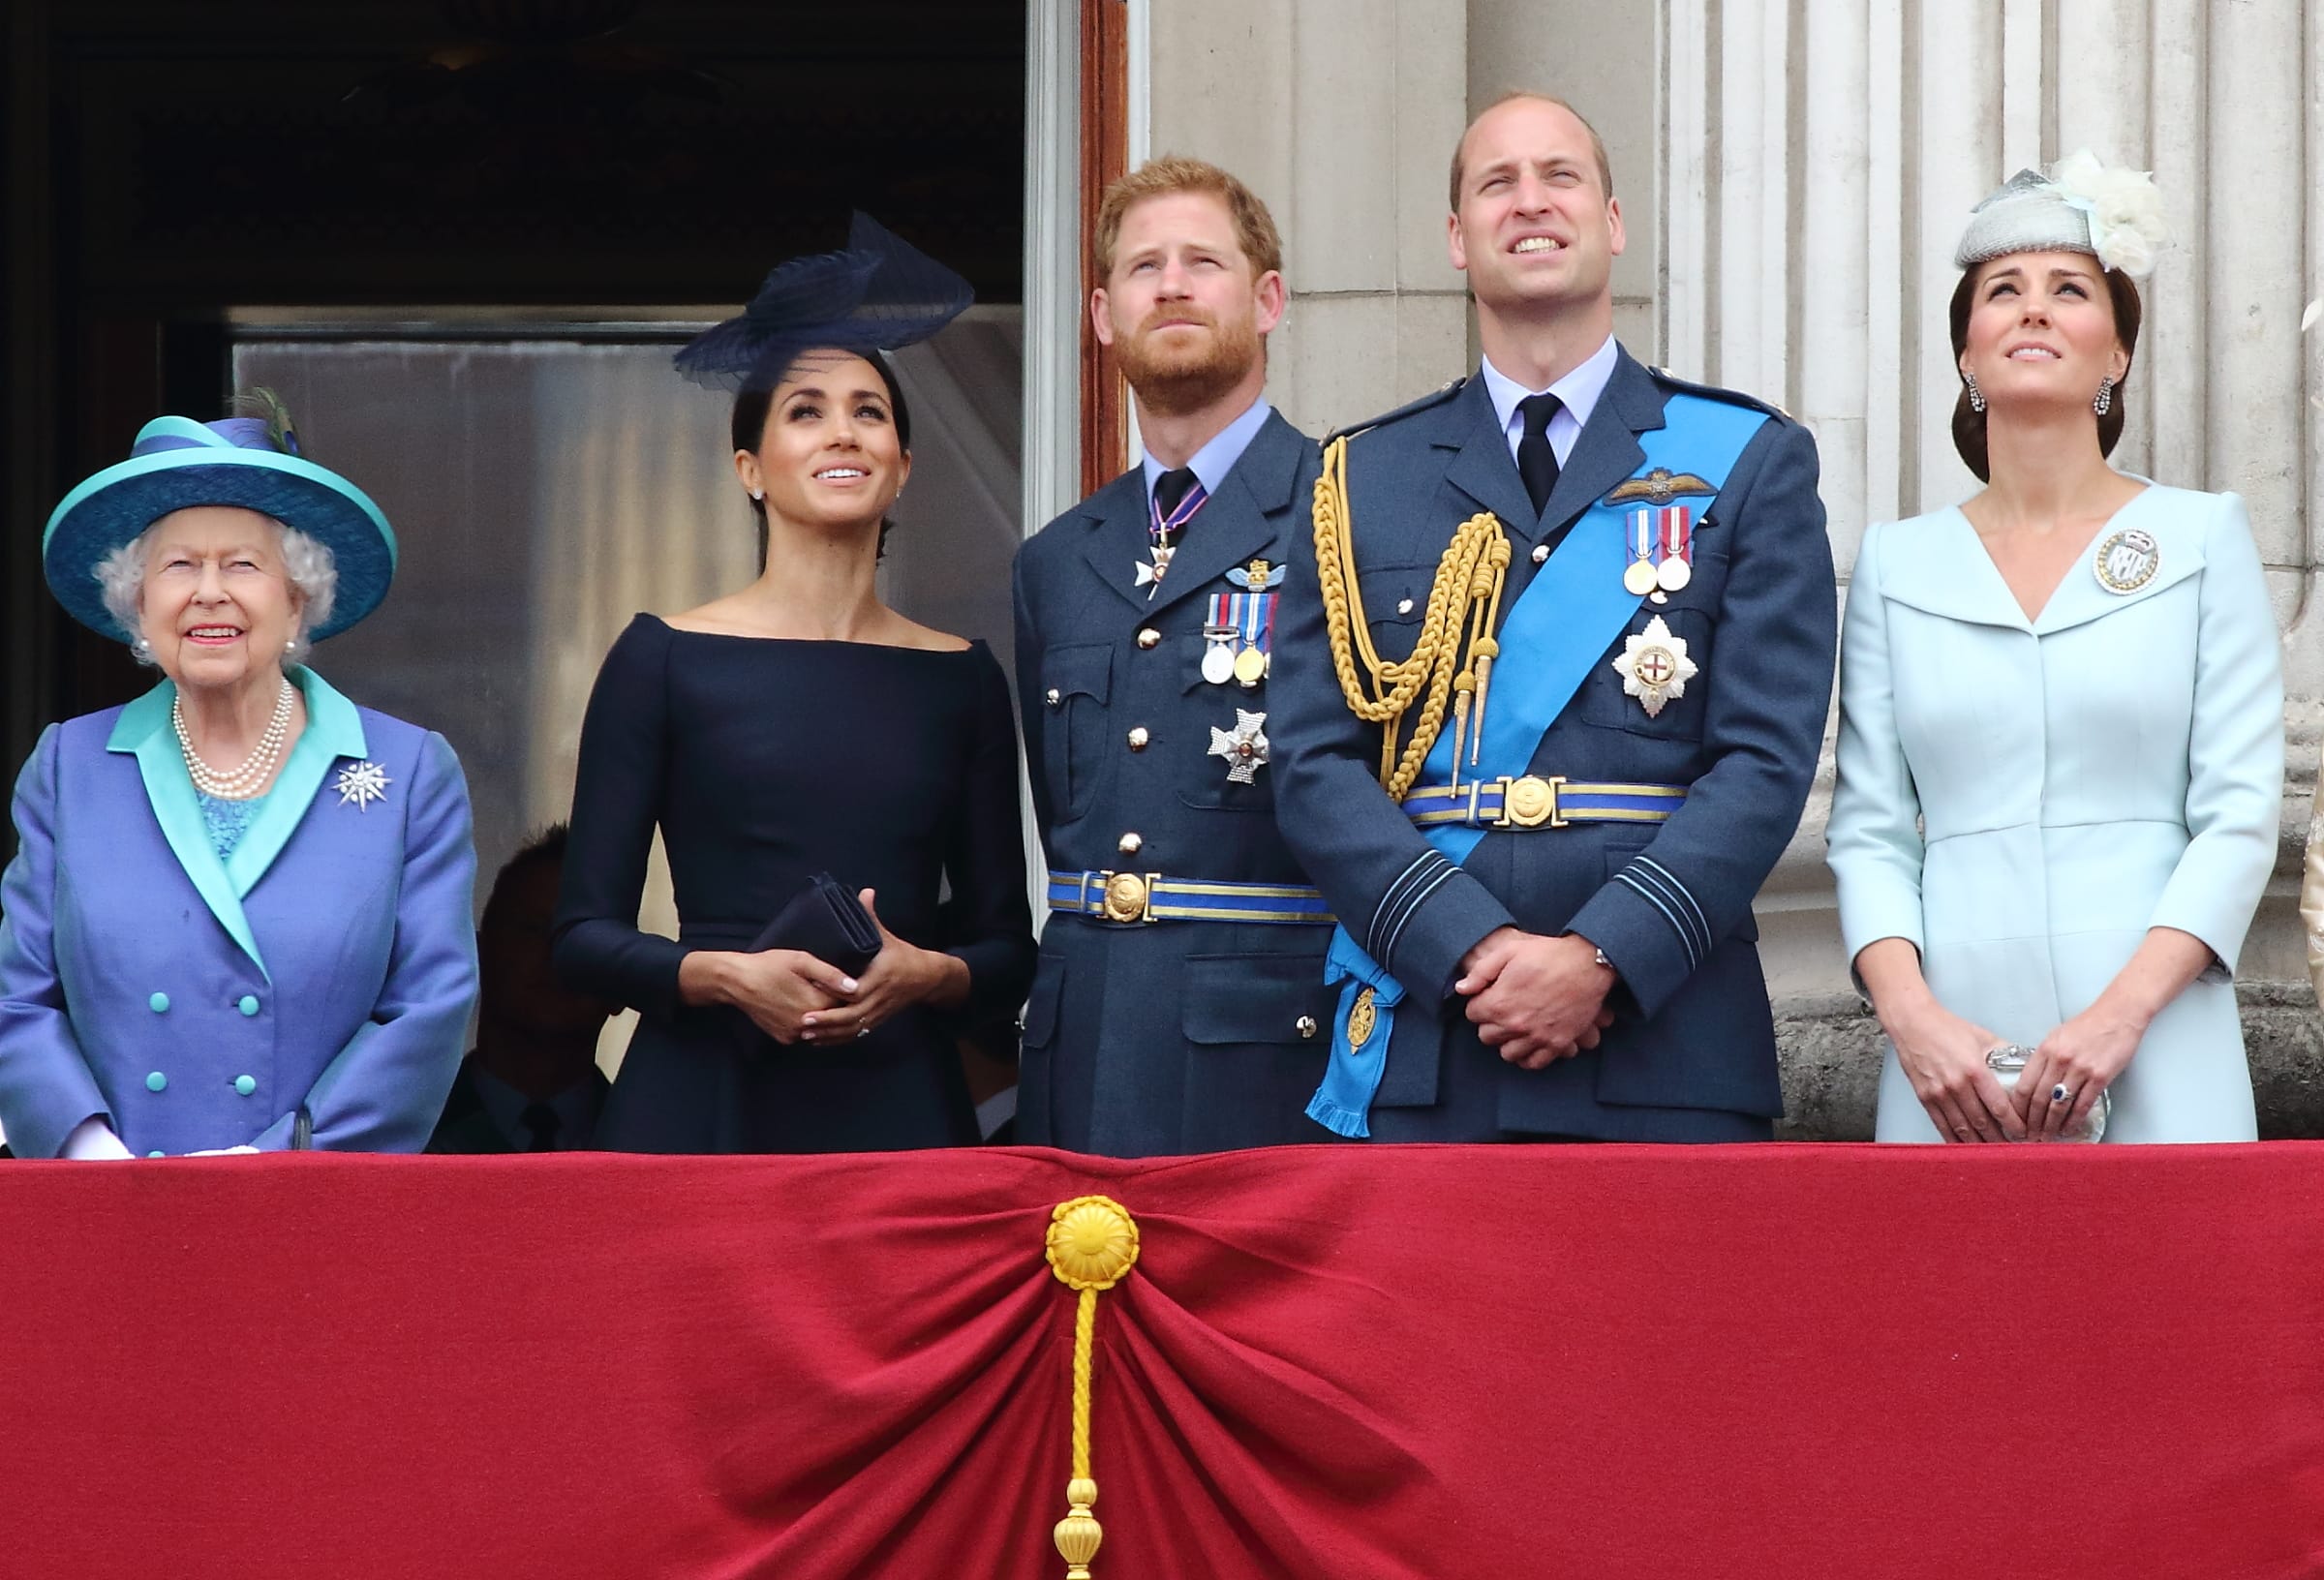 Queen Elizabeth II, Prince Harry and Meghan Markle (The Duke and Duchess of Sussex) with Prince William and Kate Middleton 